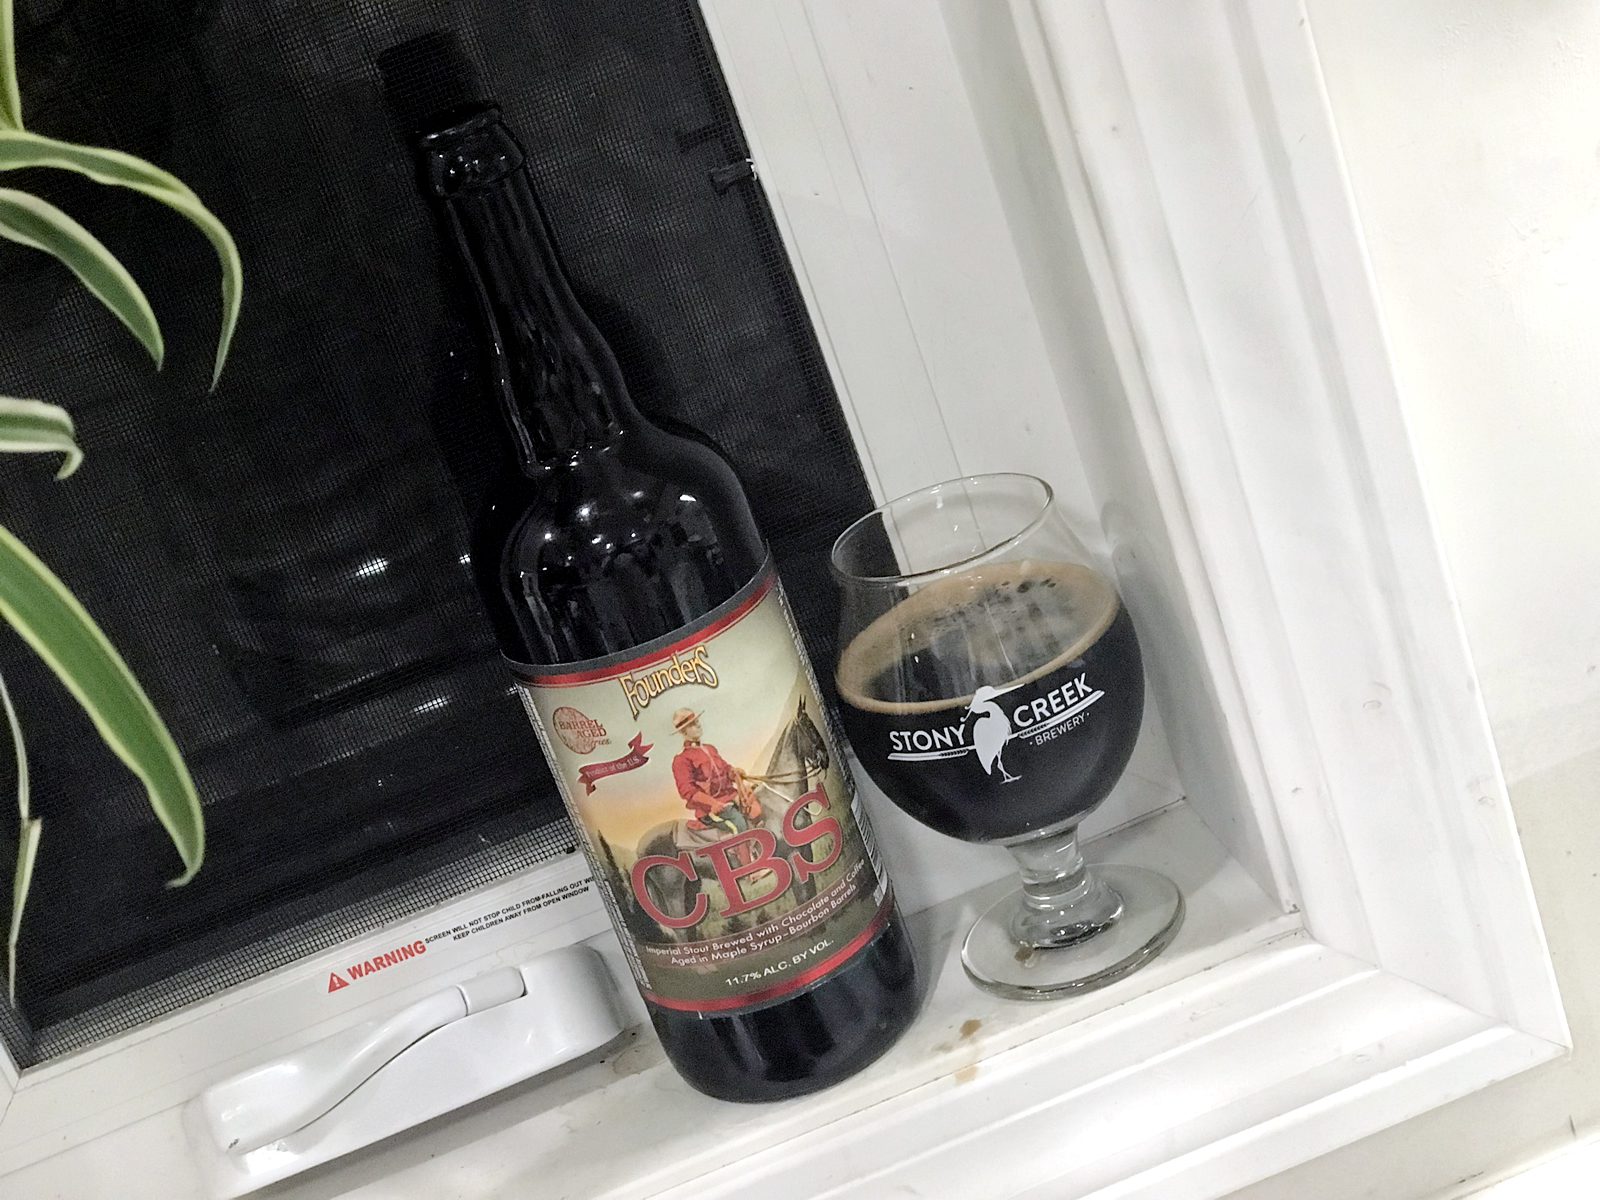 Founders Brewing Company: Canadian Breakfast Stout (CBS) (2017) on the Windowsill